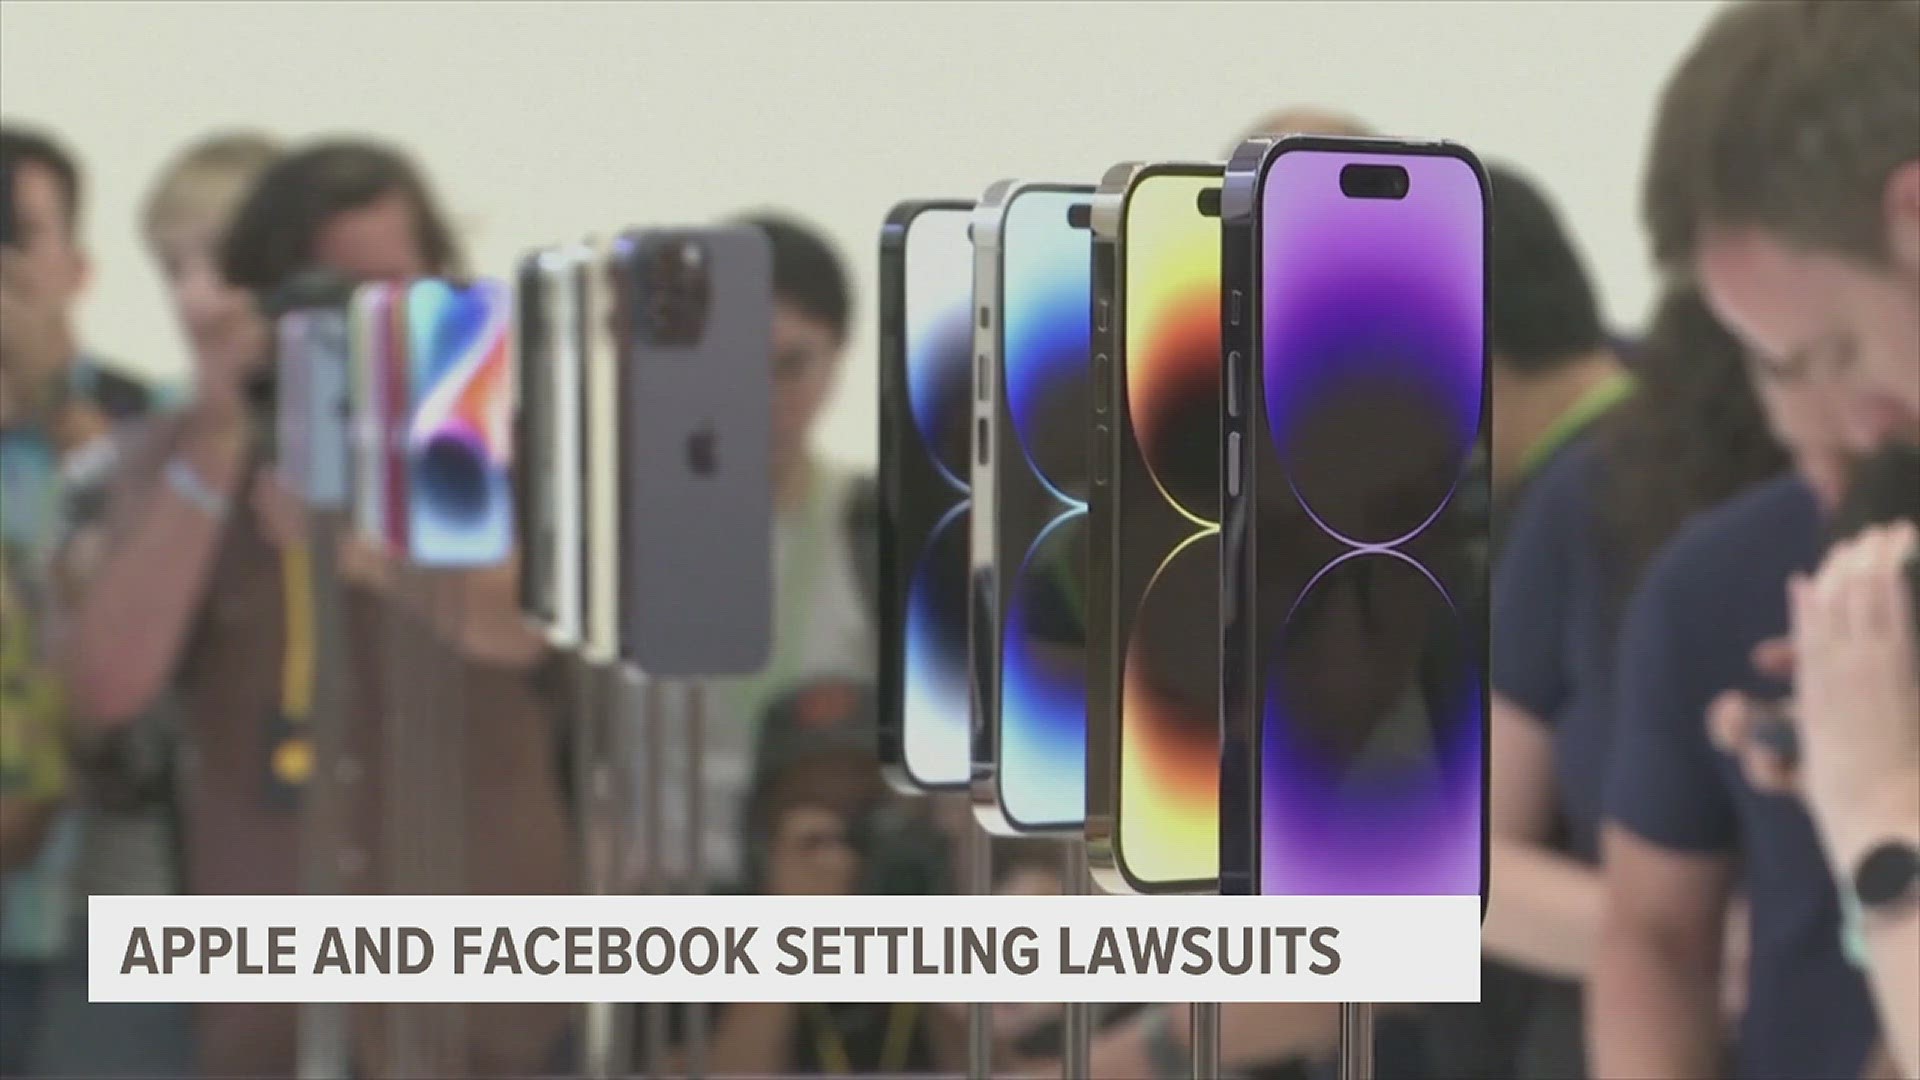 Payday could be coming for millions, as Apple agrees to pay up to $500 million and Facebook's parent company Meta agrees to pay up to $725 million in settlements.